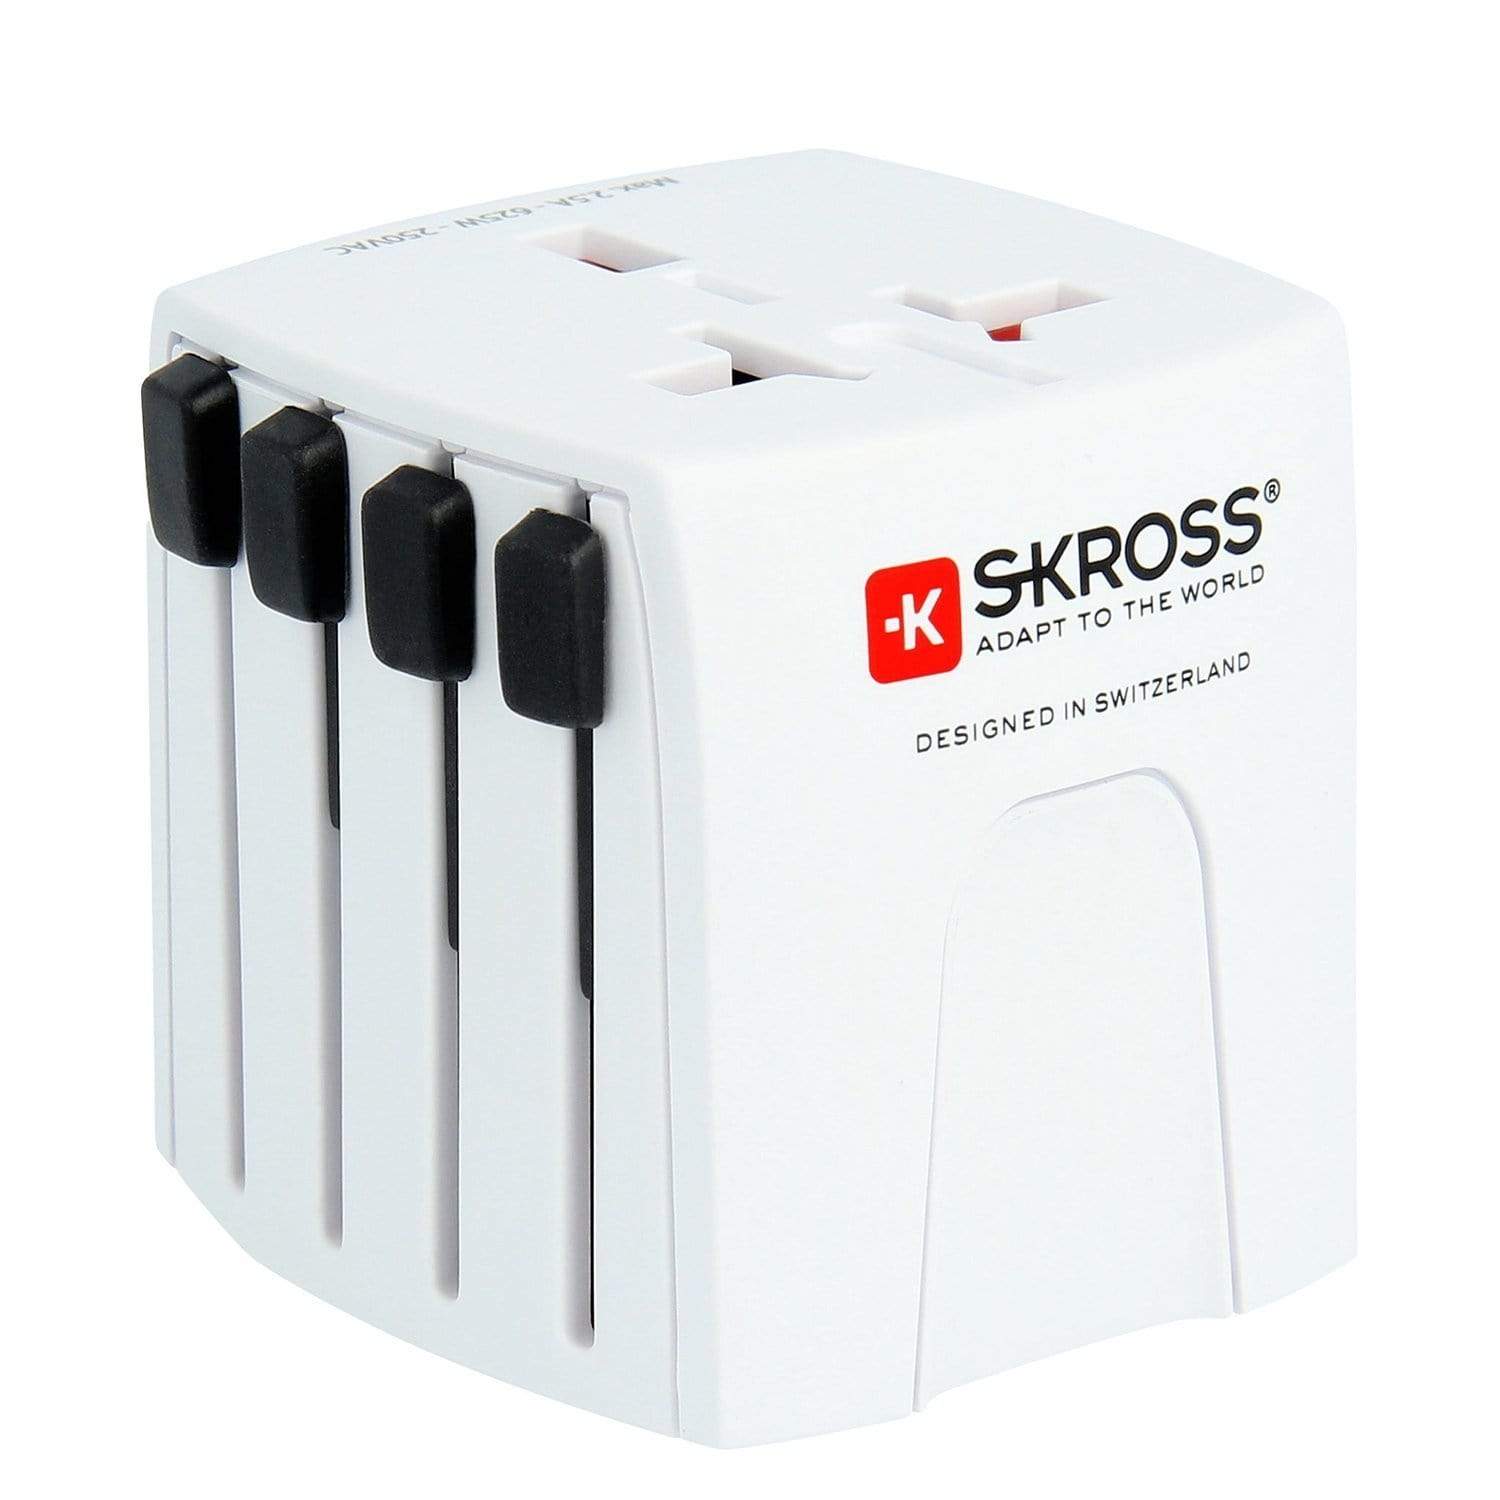 Skross MUV Micro Multi Plug Travel Adapter without USB - White - 1302180 - Jashanmal Home